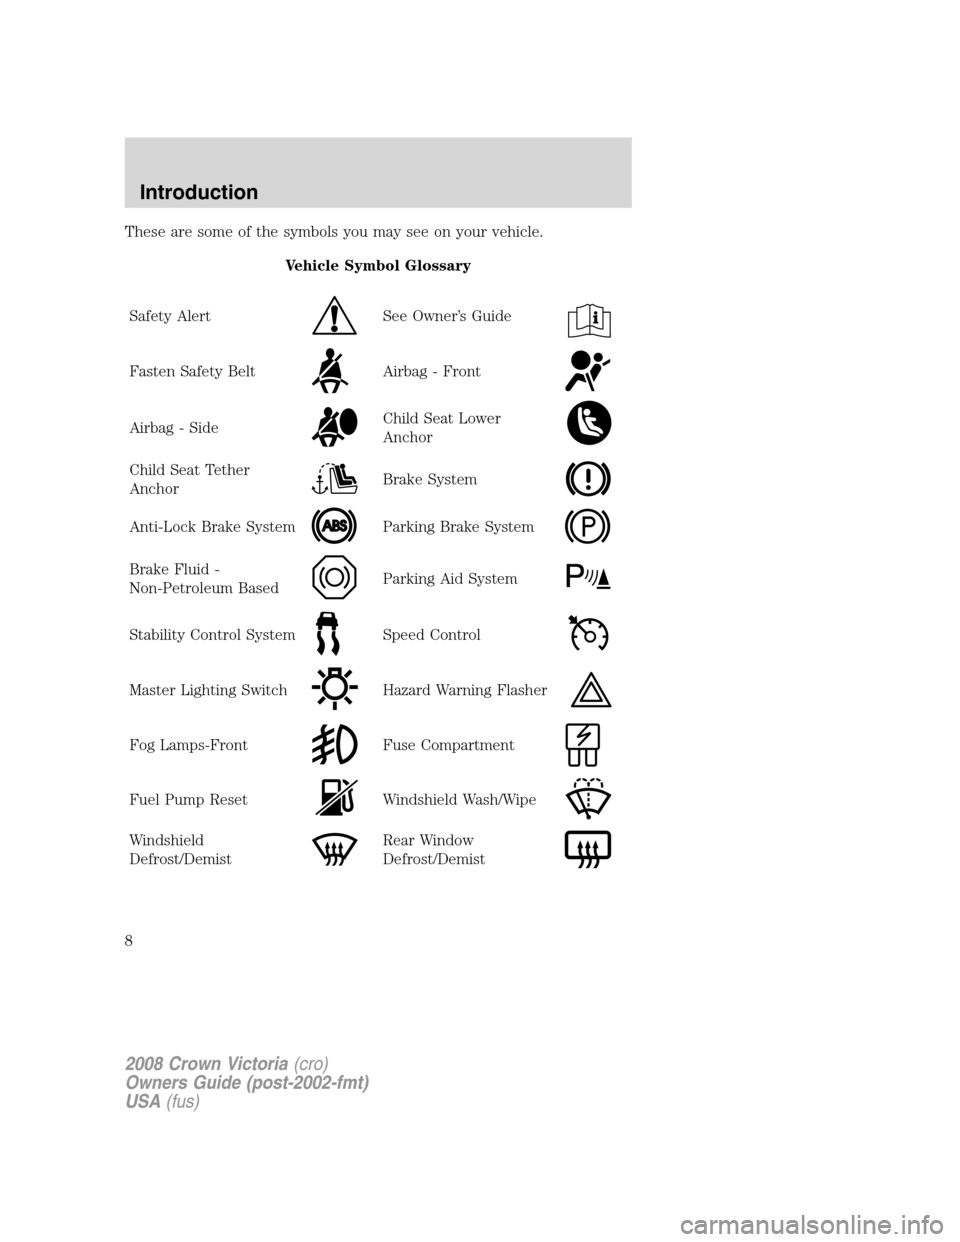 FORD CROWN VICTORIA 2008 2.G Owners Manual These are some of the symbols you may see on your vehicle.
Vehicle Symbol Glossary
Safety Alert
See Owner’s Guide
Fasten Safety BeltAirbag - Front
Airbag - SideChild Seat Lower
Anchor
Child Seat Tet